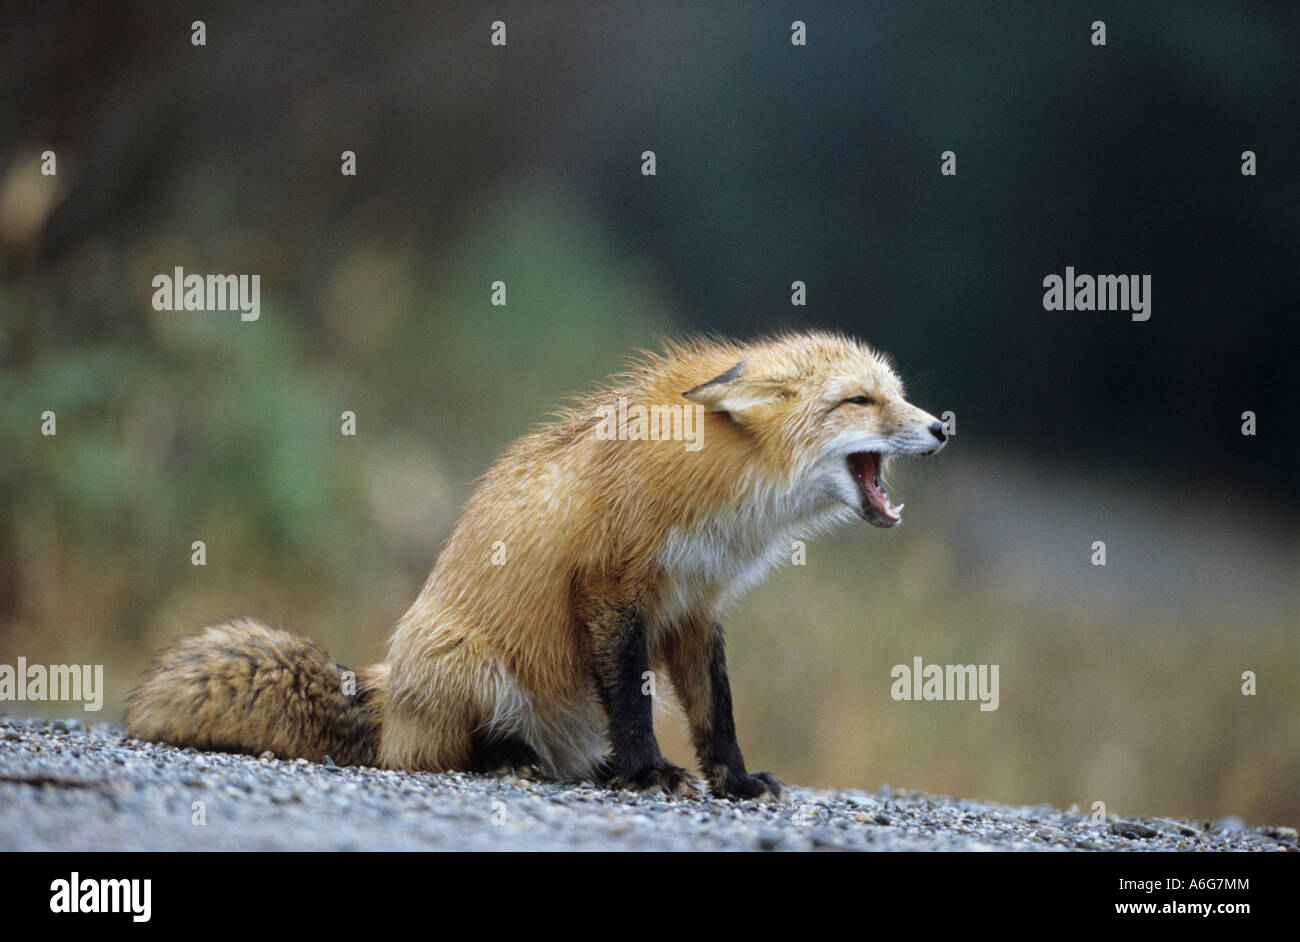 American Red Fox (Vulpes vulpes) barking at other fox, Canada Stock Photo